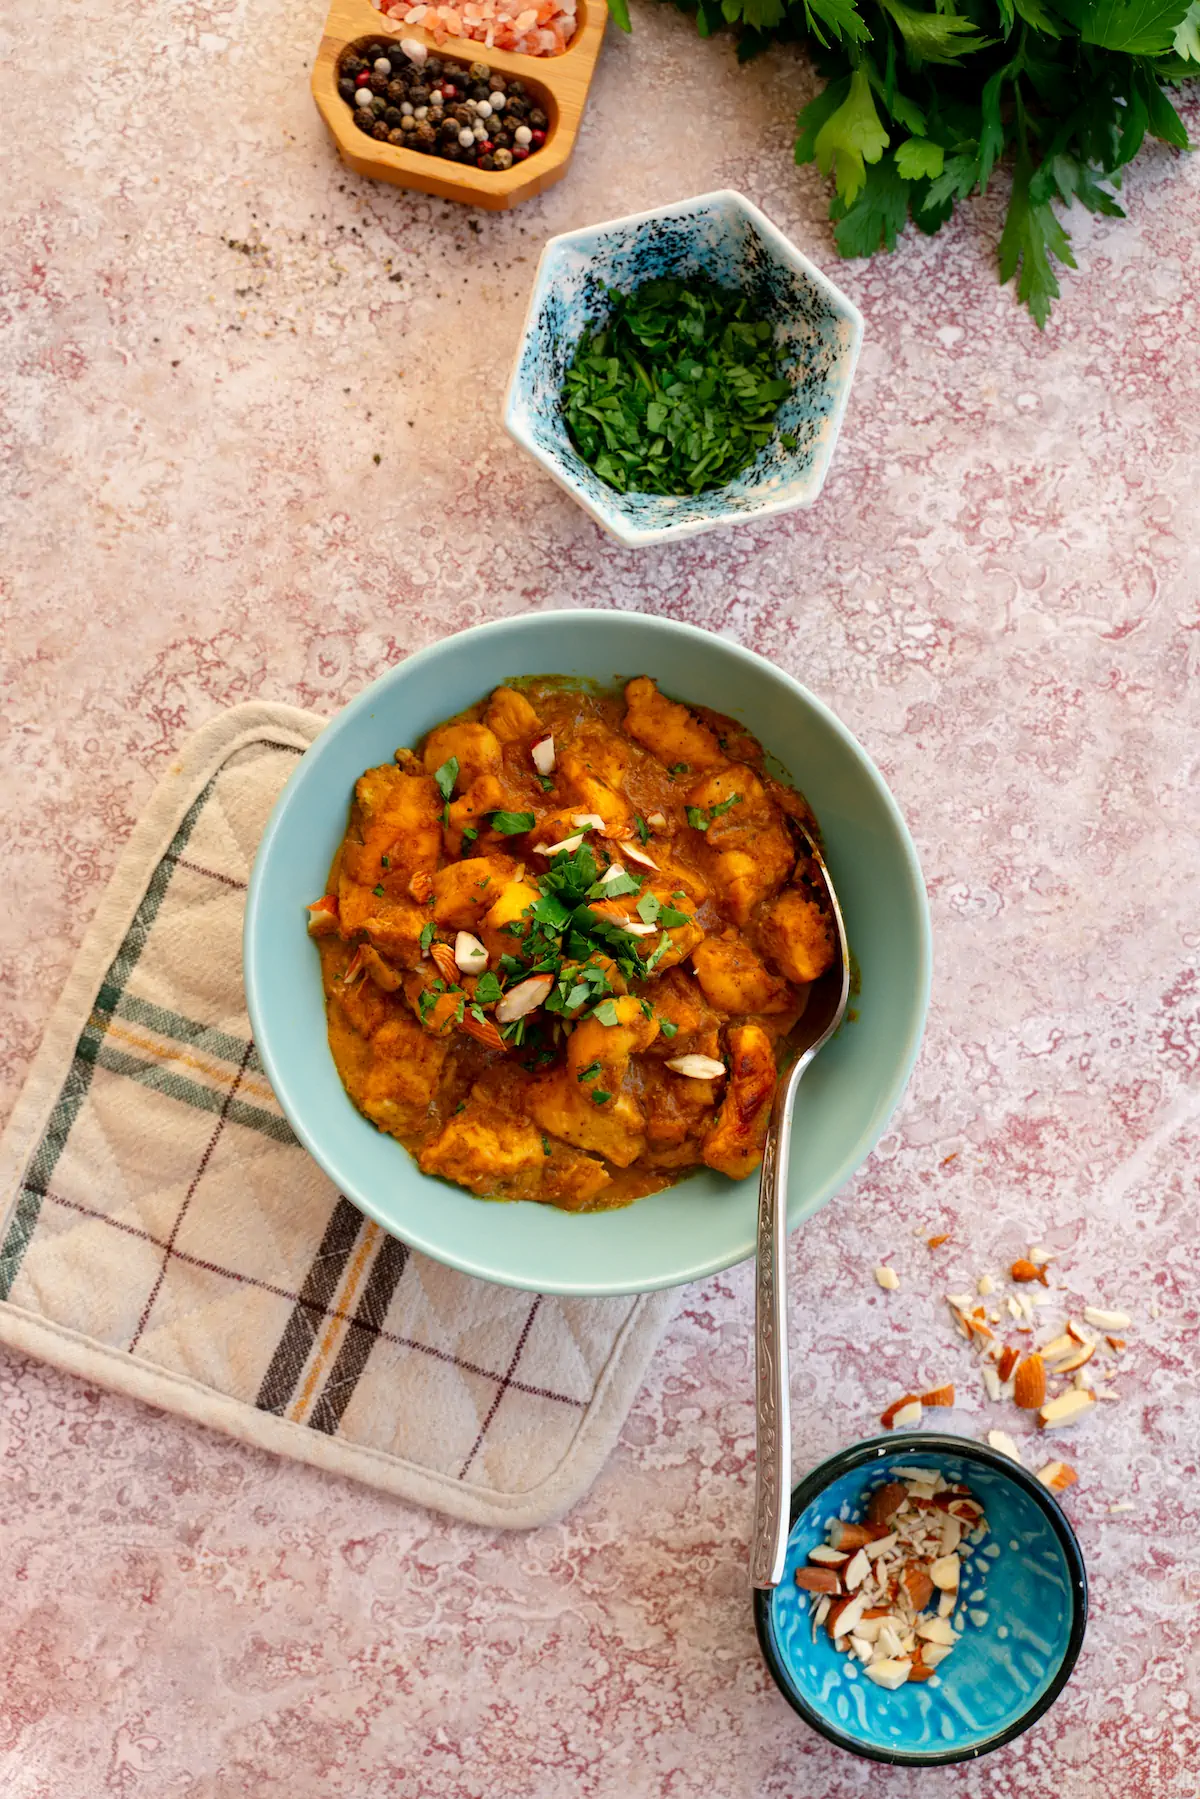 Homemade chicken korma in a bowl and served with a spoon alongside bowls of chopped fresh herbs and chopped almonds.